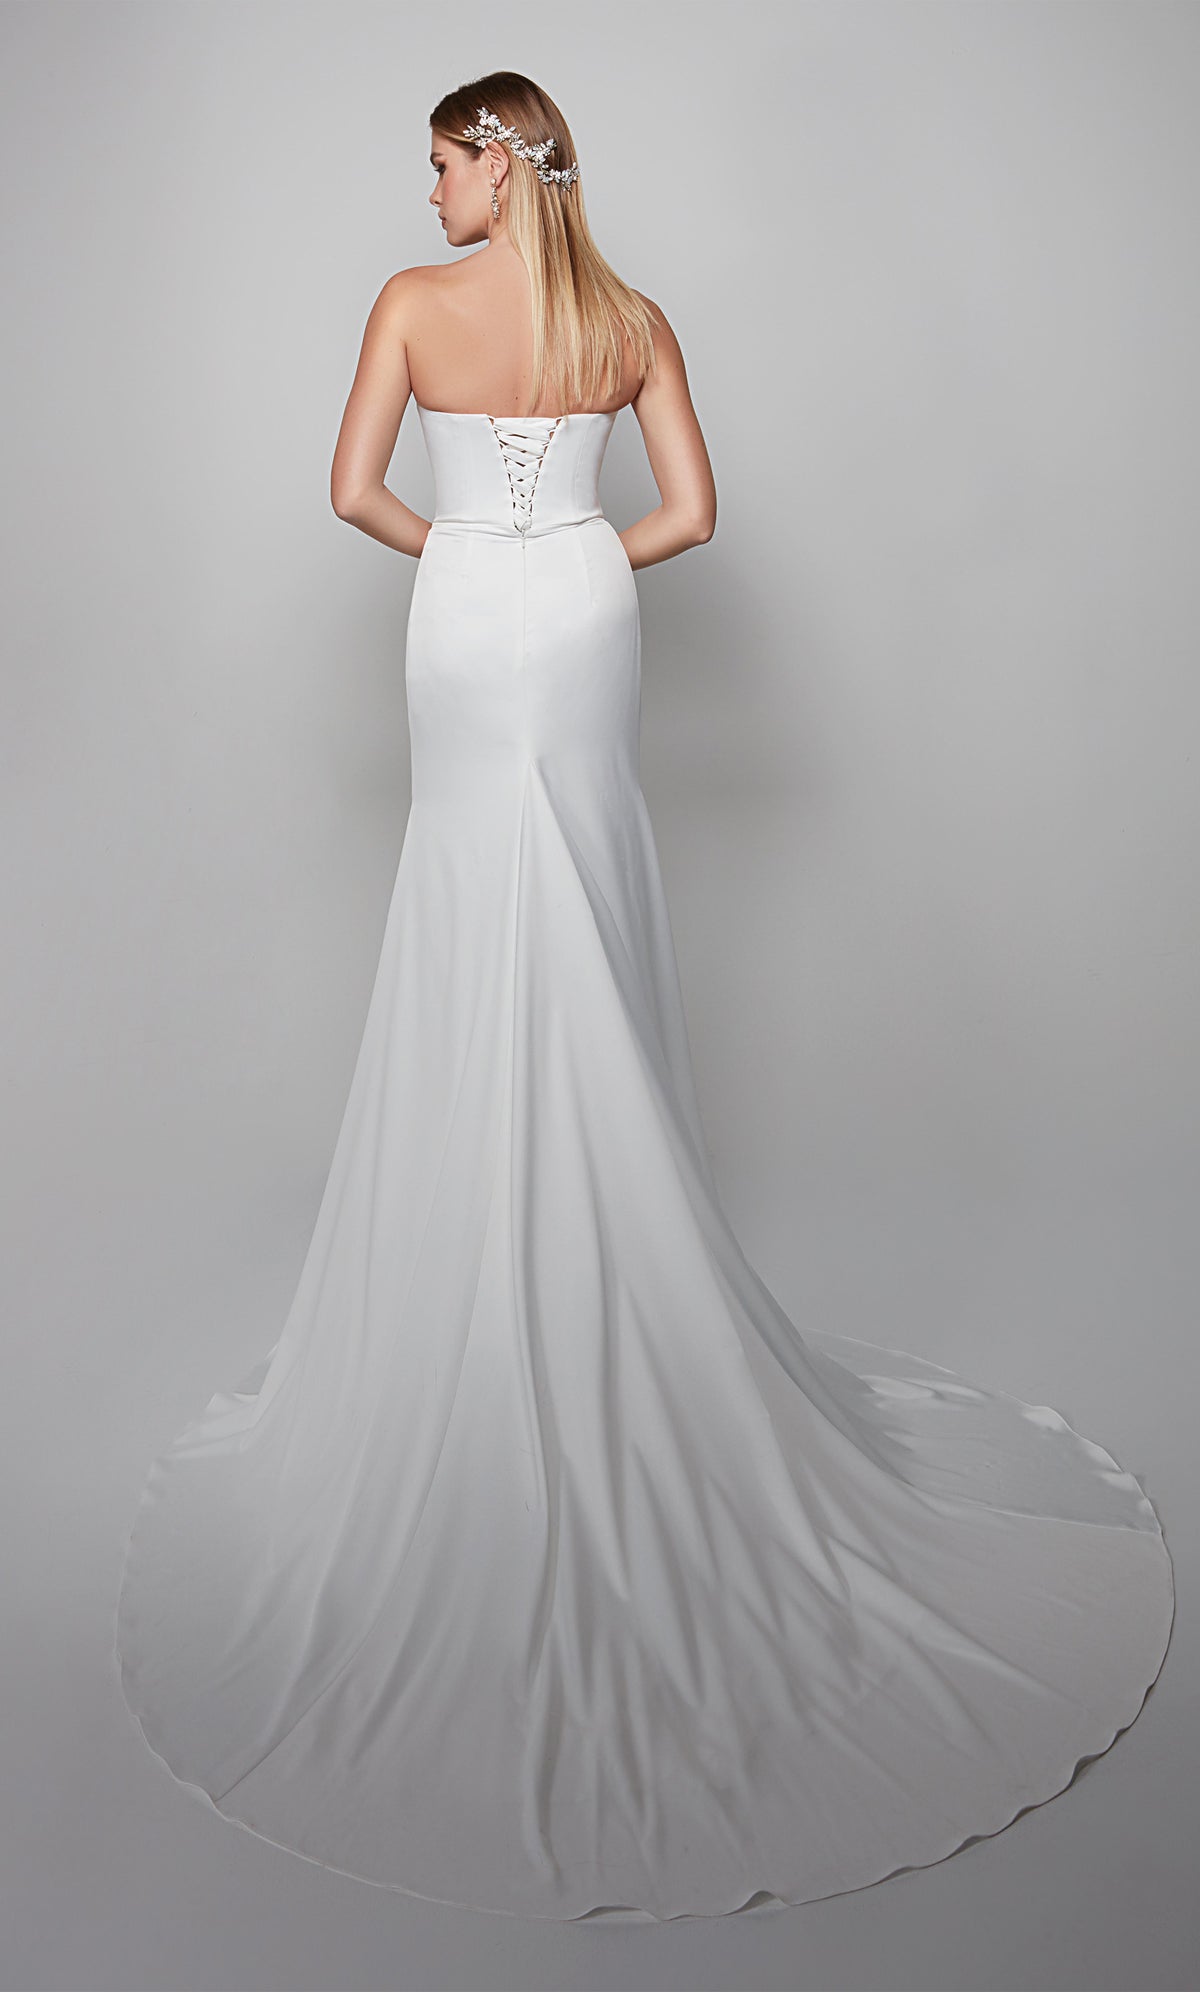 White satin wedding gown with a lace up back, removable puff sleeves, and train.